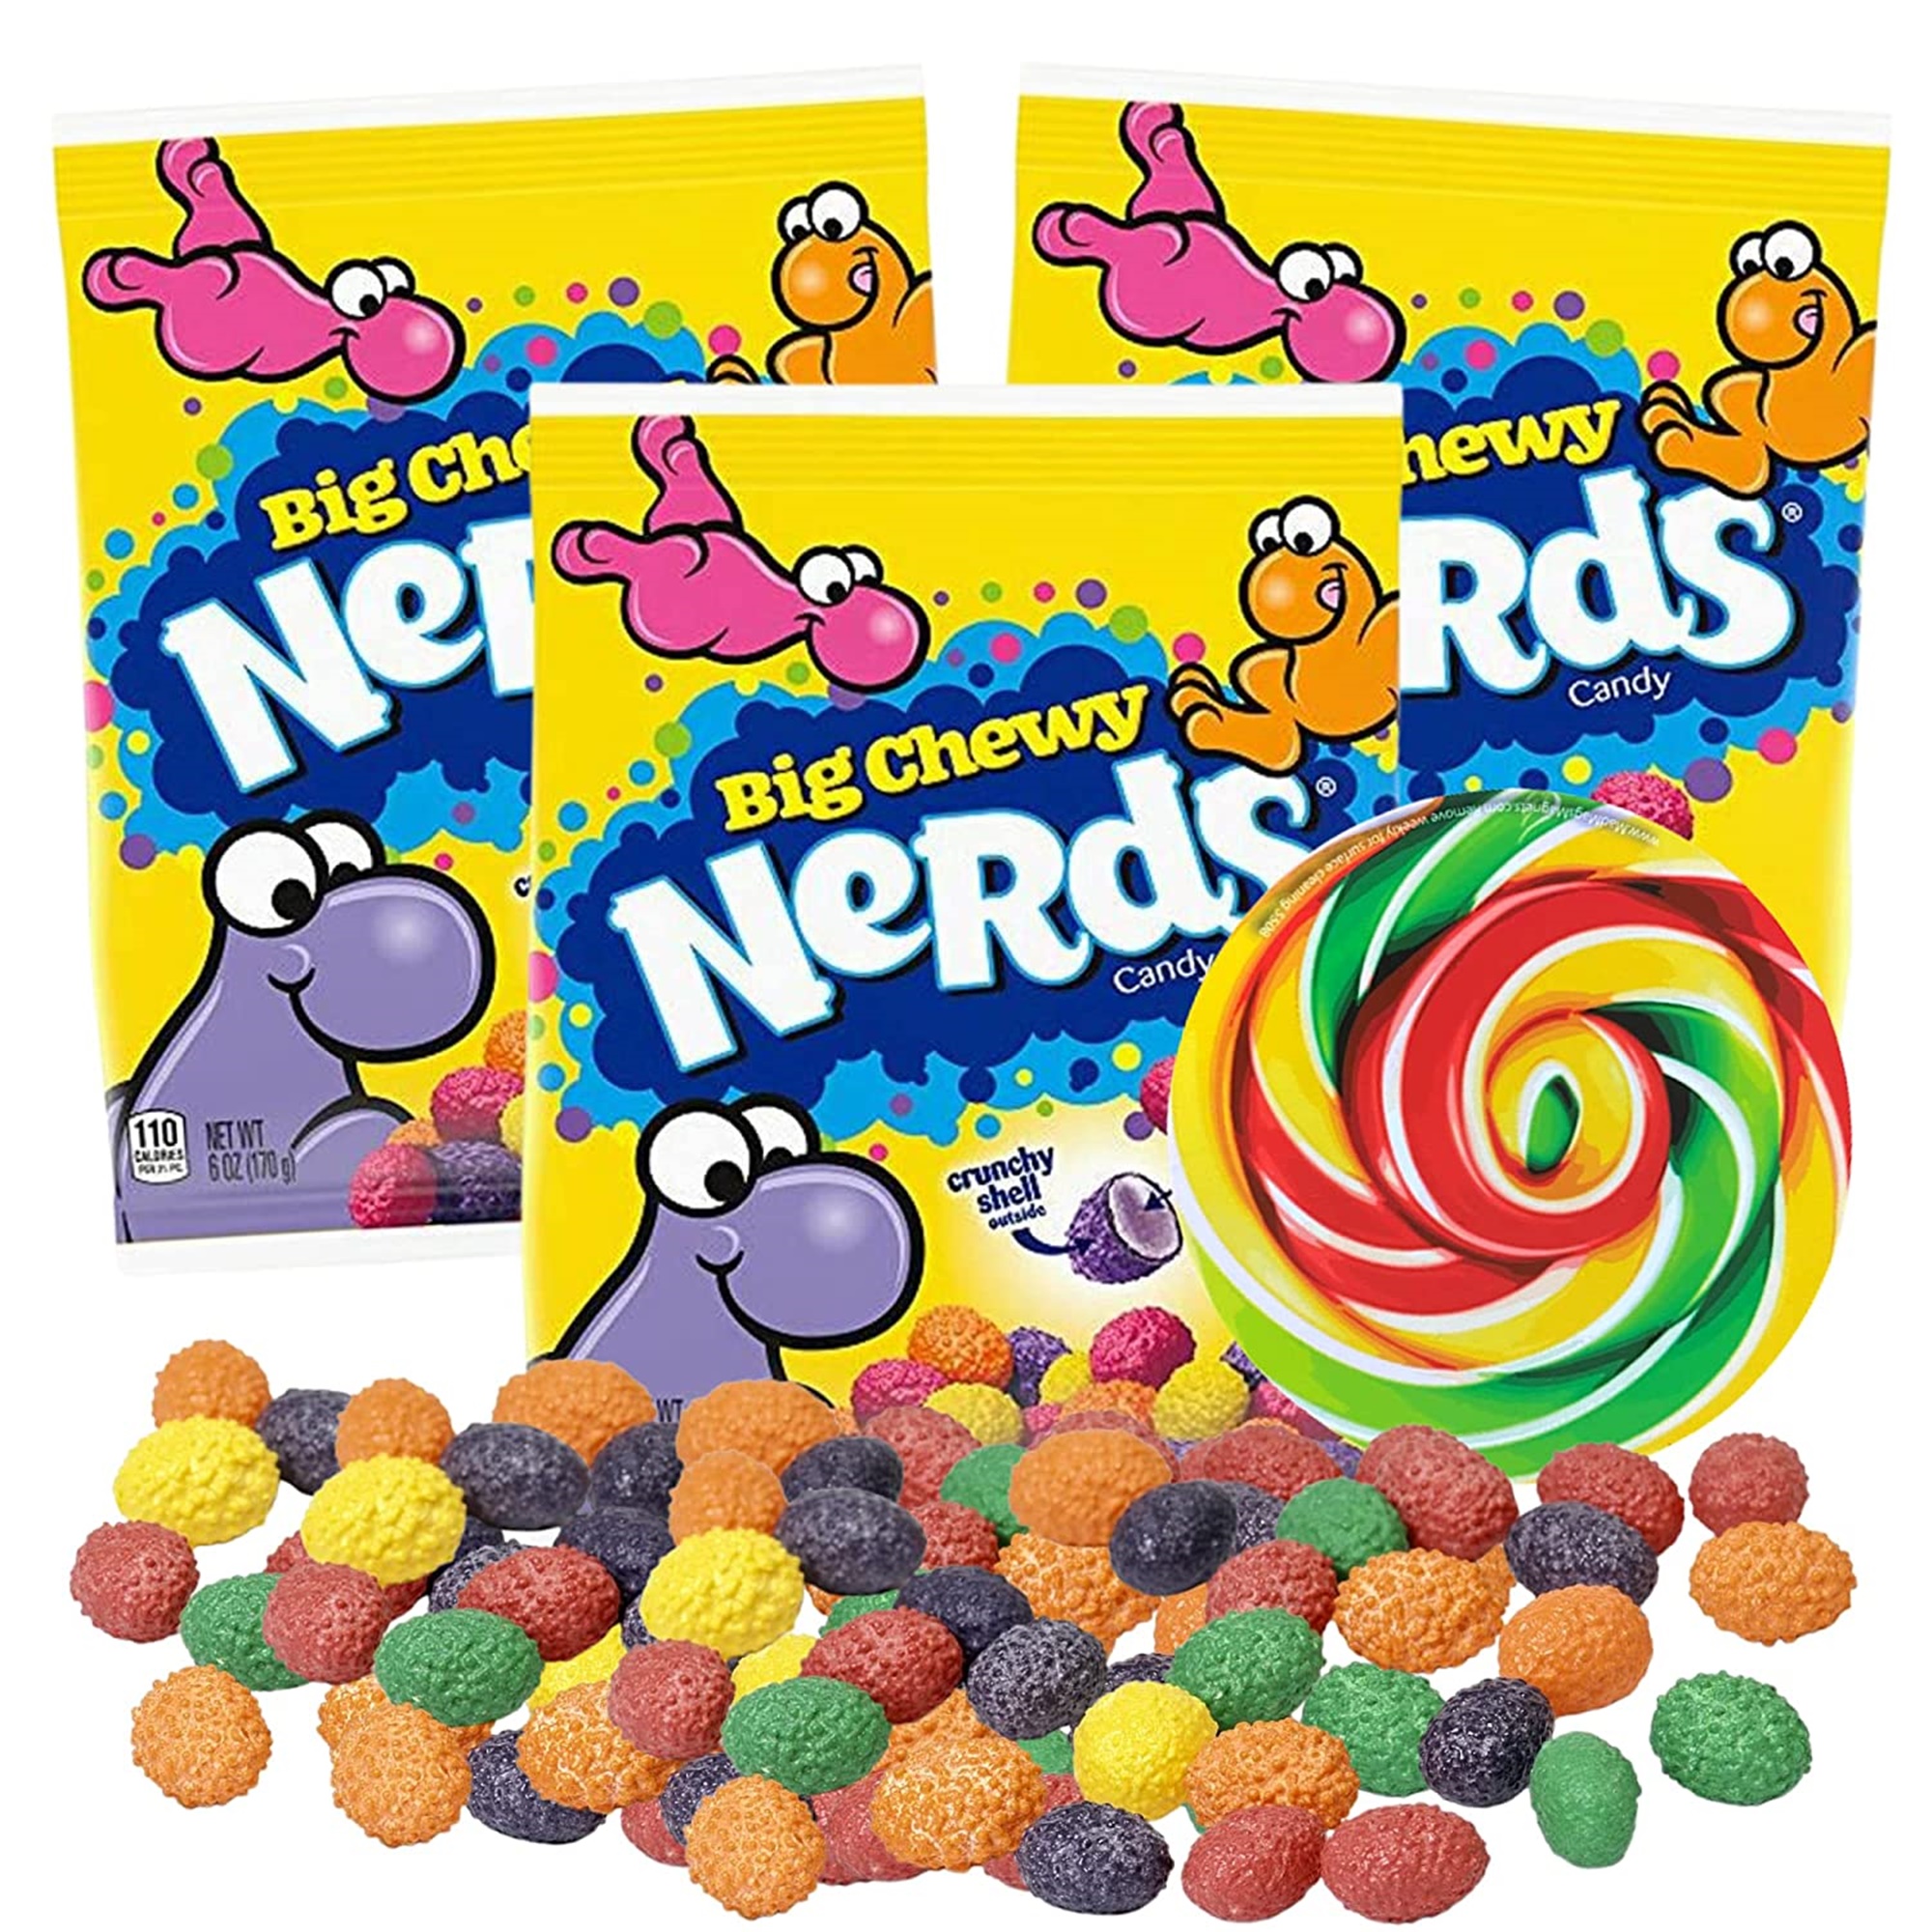 Nerds Big Chewy Gummy Candies, Hard Candy Shell with Soft Center, Assorted Fruit Flavors, Candy Magnet Included, Pack of 3, 6 Ounces Each - image 1 of 7